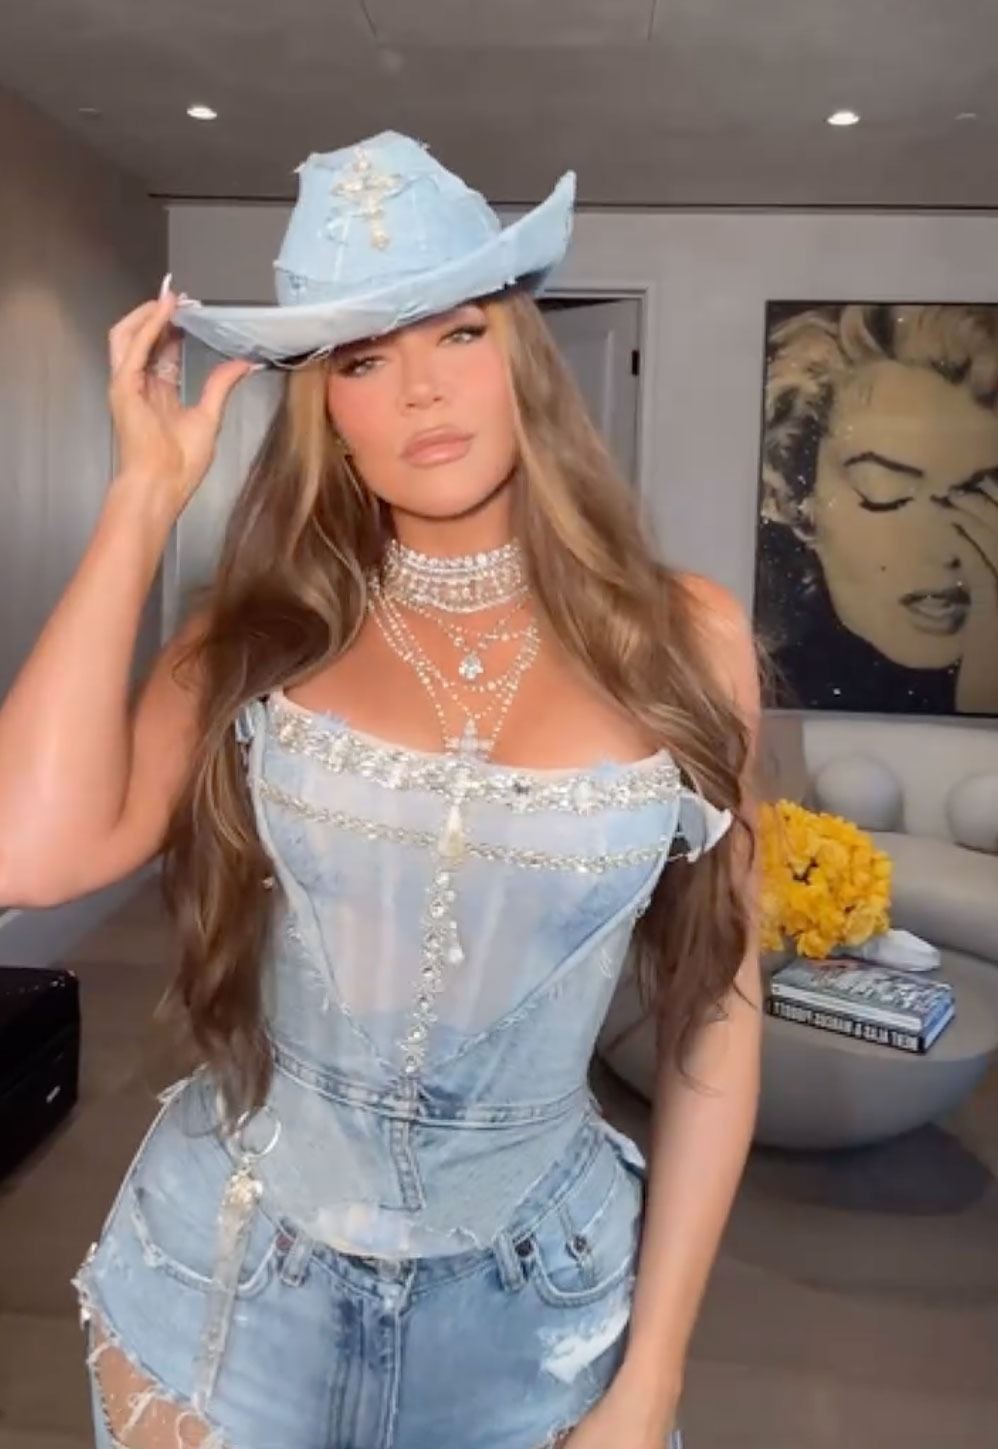 Khloe Kardashian sporting an all-denim outfit and a cowboy hat for her western-themed birthday bash